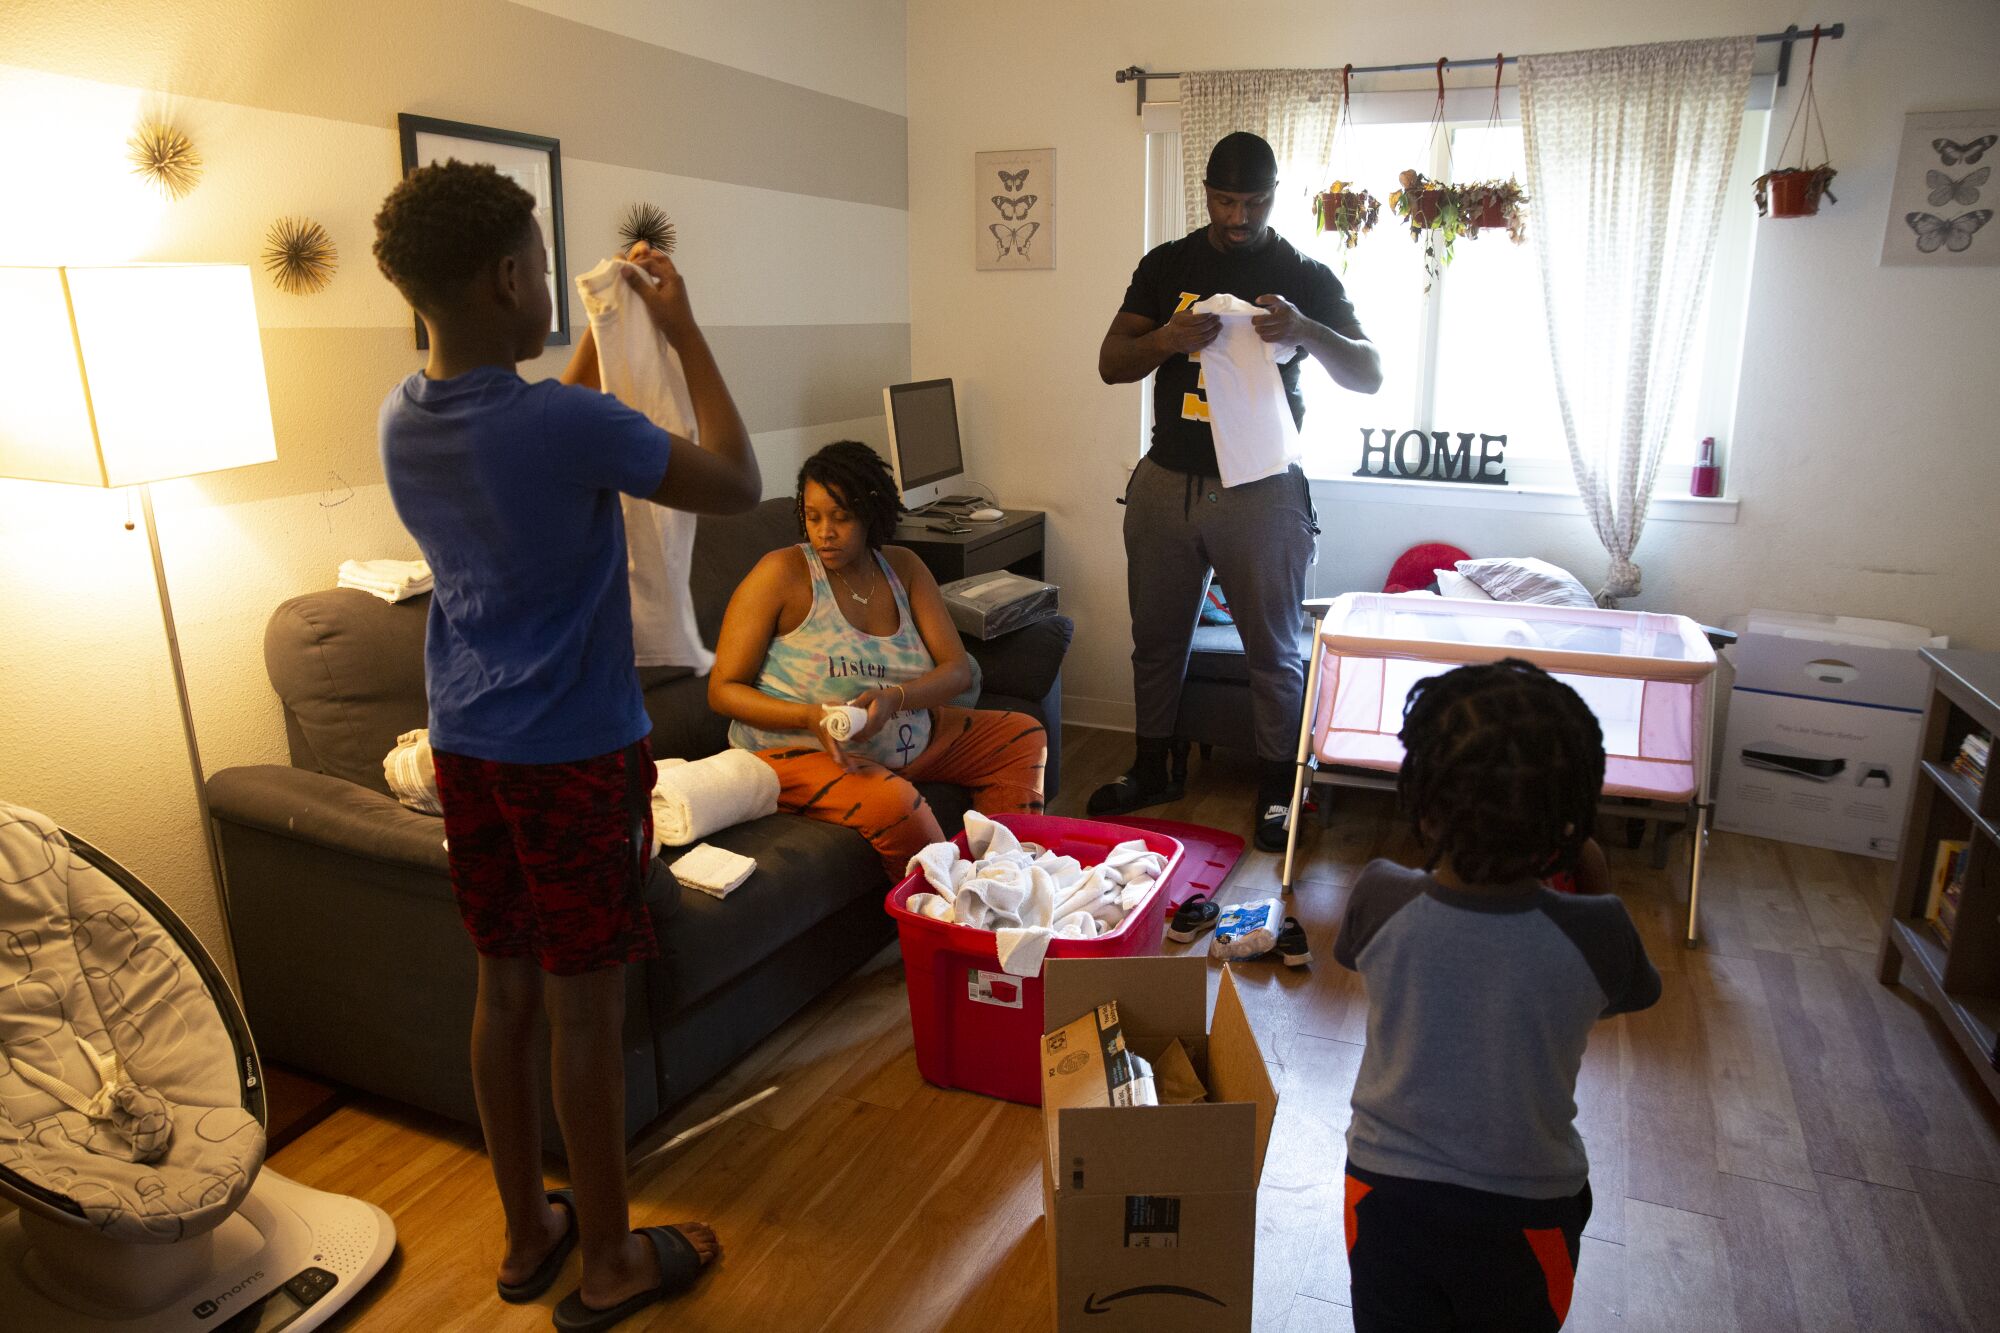 A couple and their children fold laundry in a room